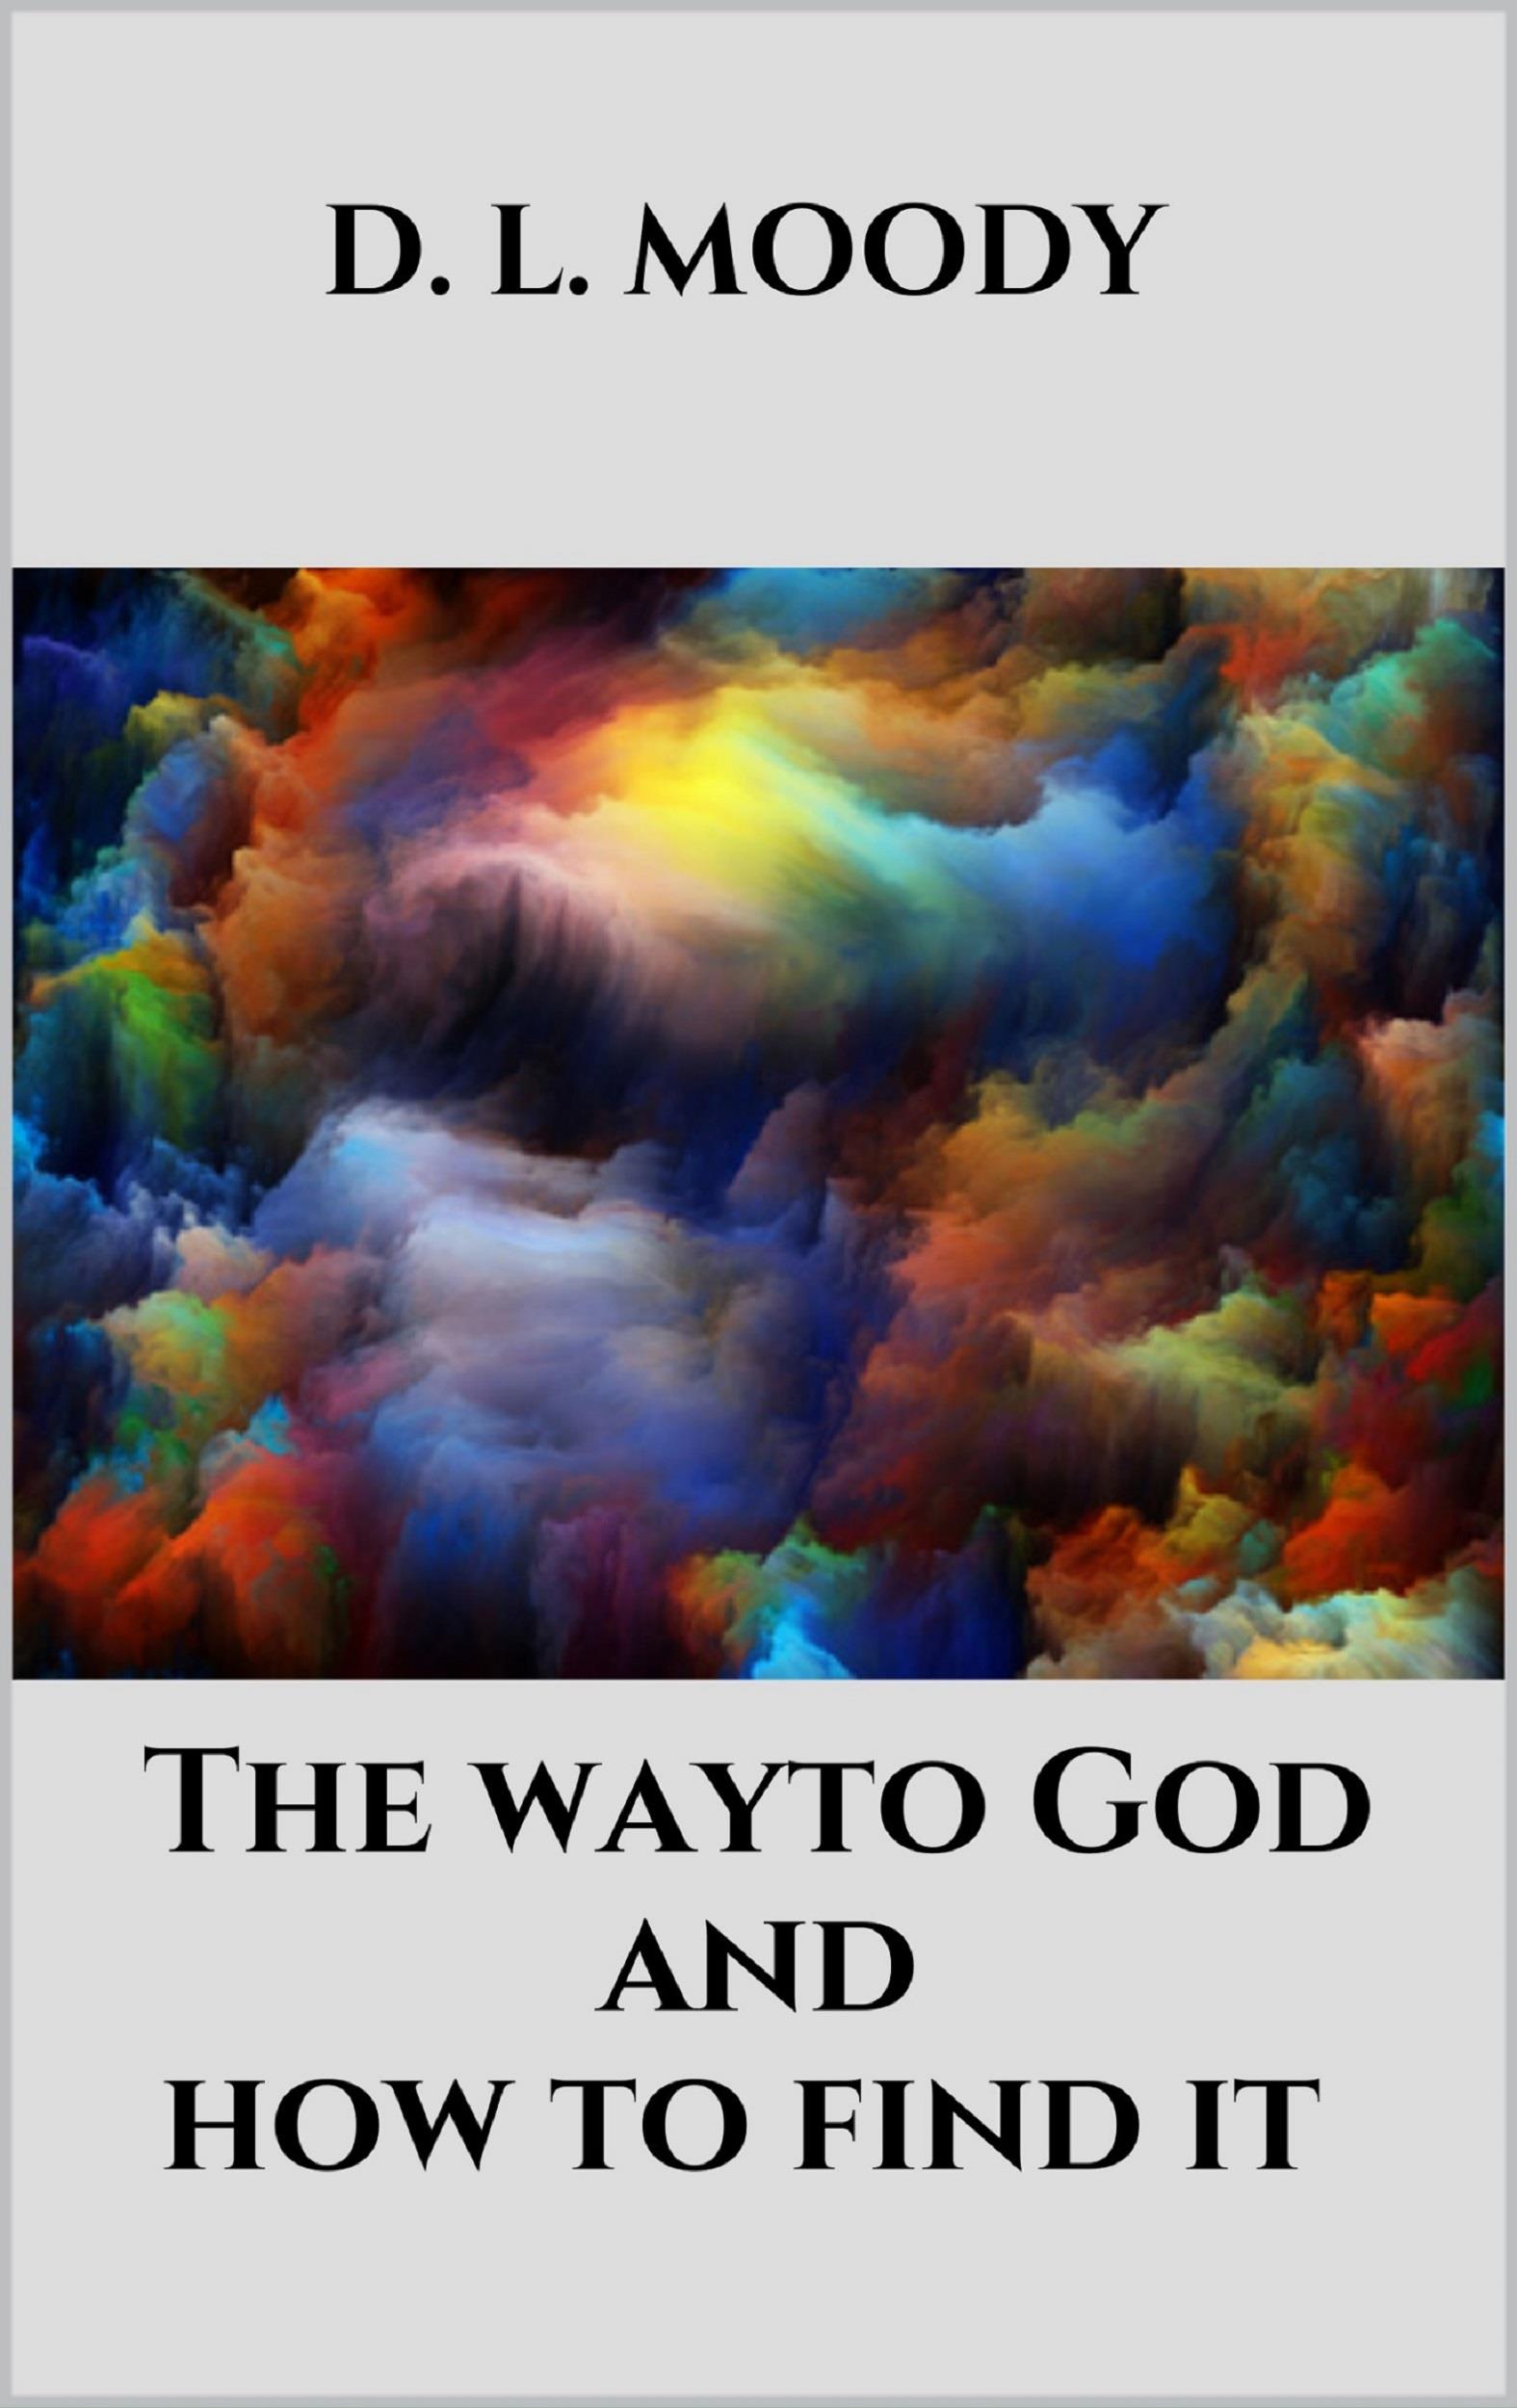 The way to God and how to find it